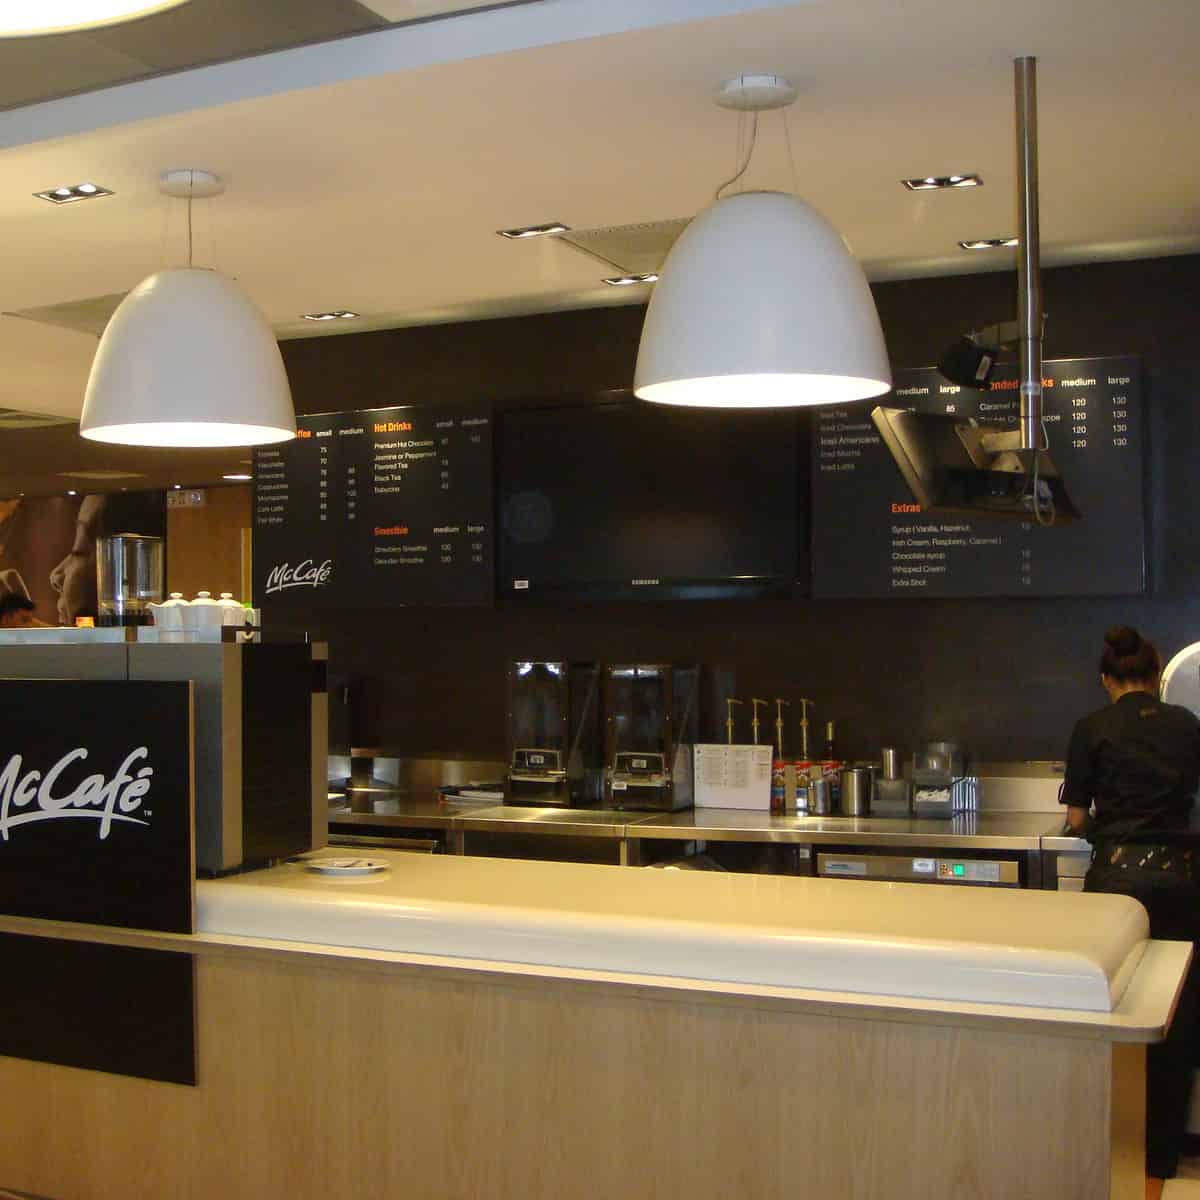 mccafe, one of the largest and most famous coffee chains in the world